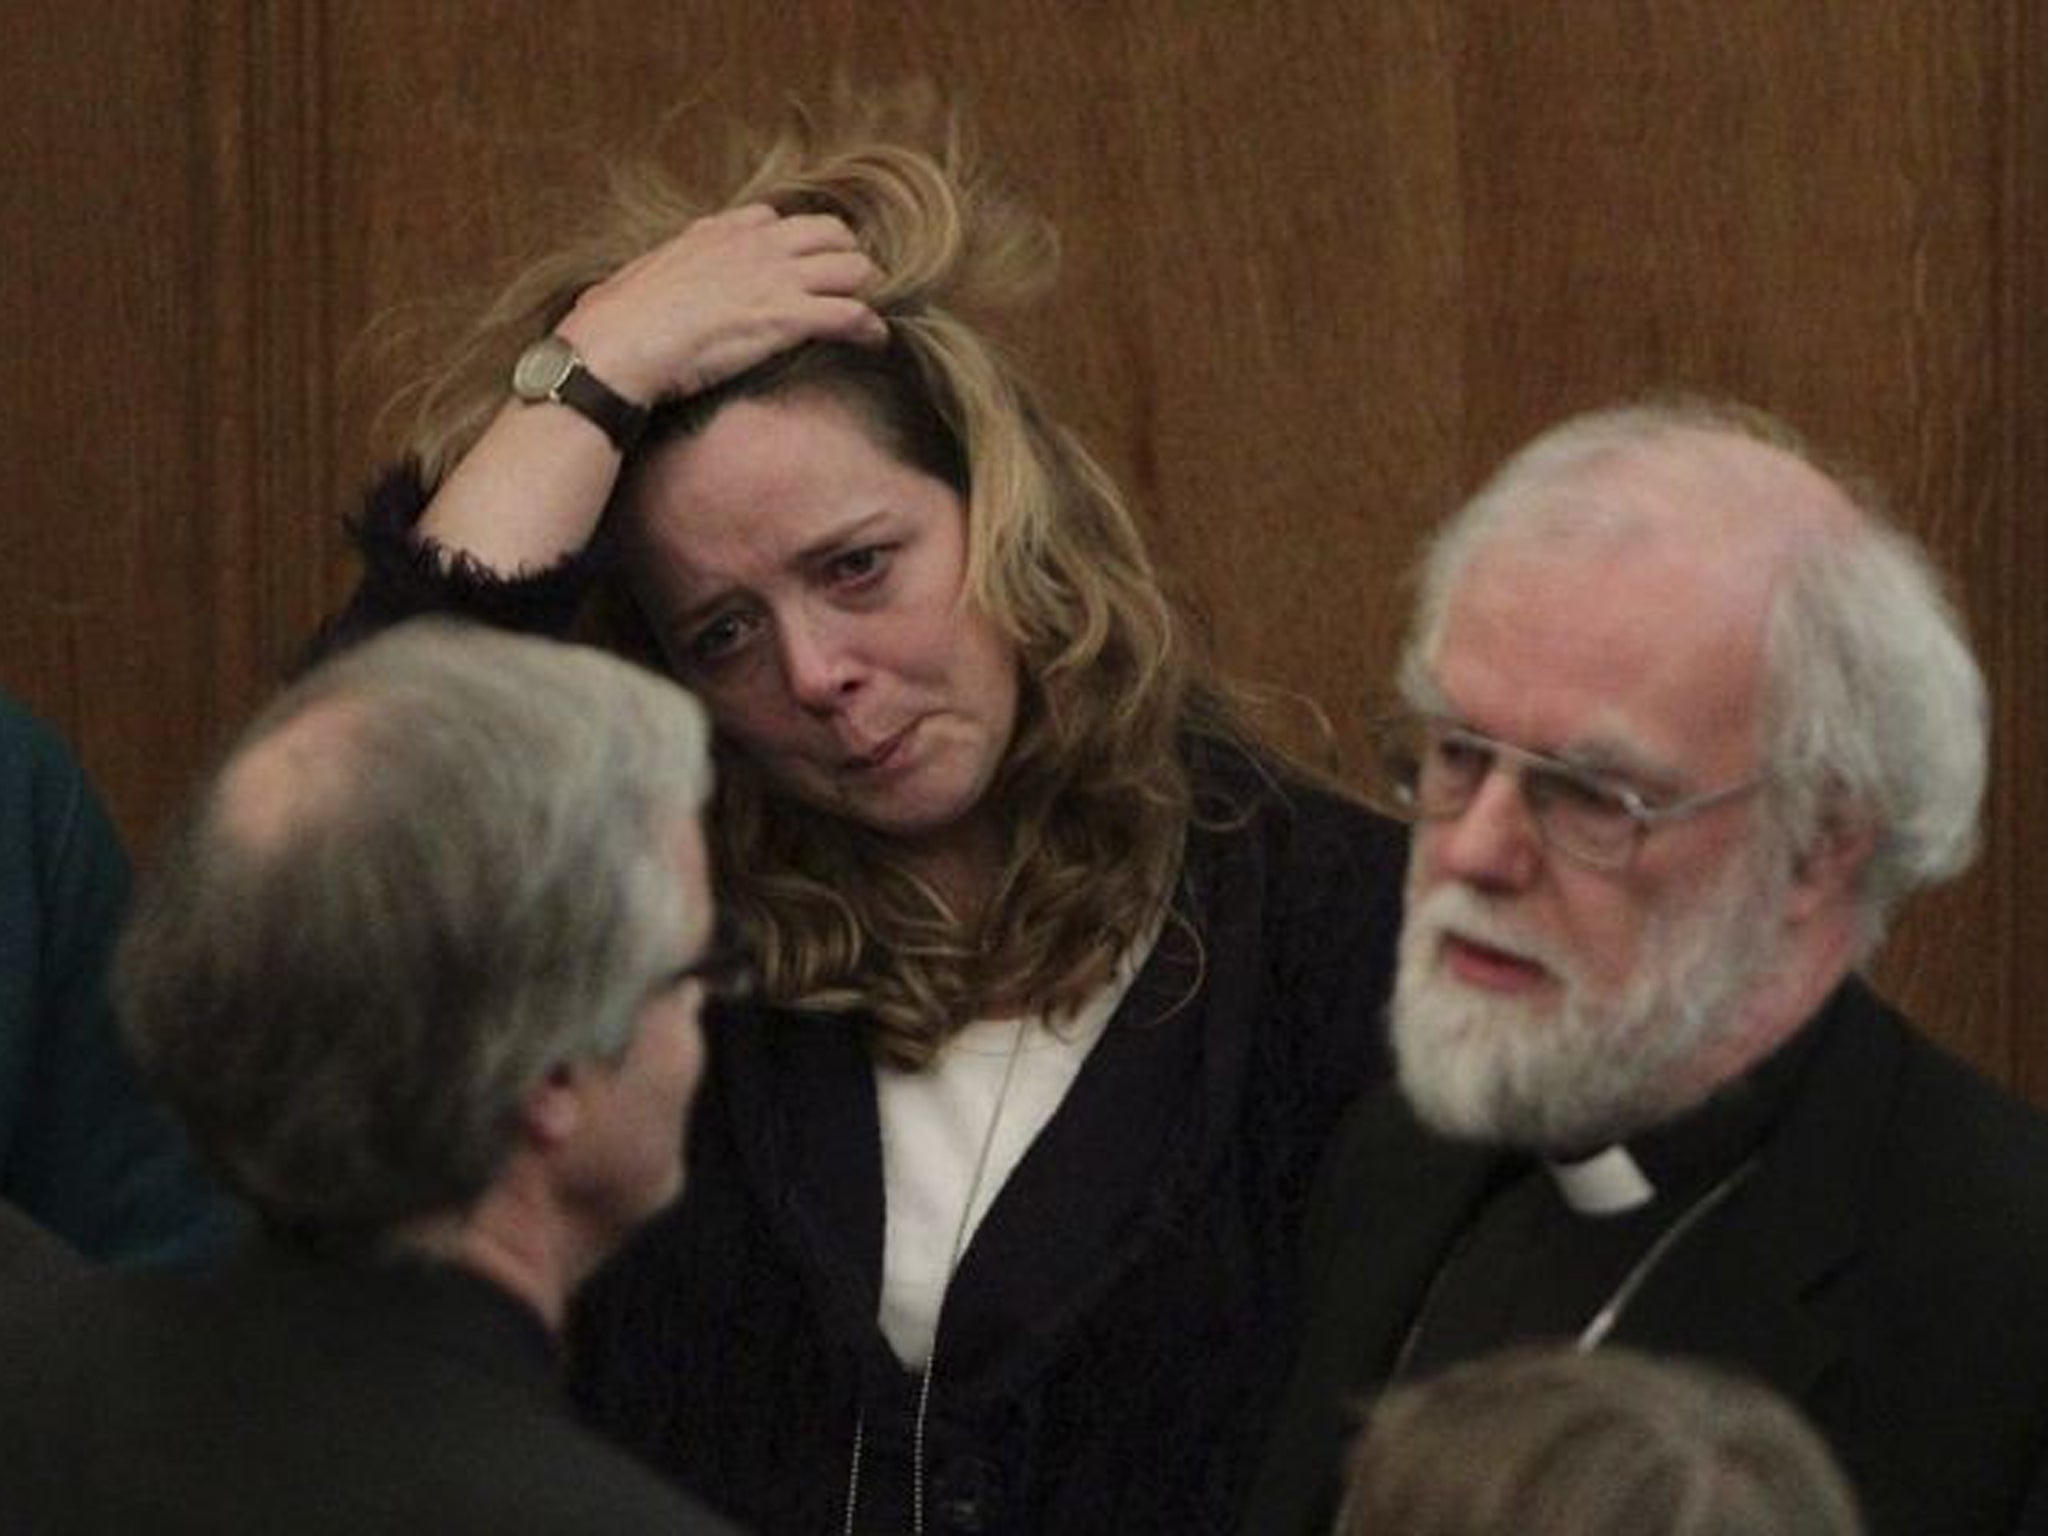 Canon Paula Gooder looks on alongside Rowan Williams, the outgoing Archbishop of Canterbury, after the decision is announced